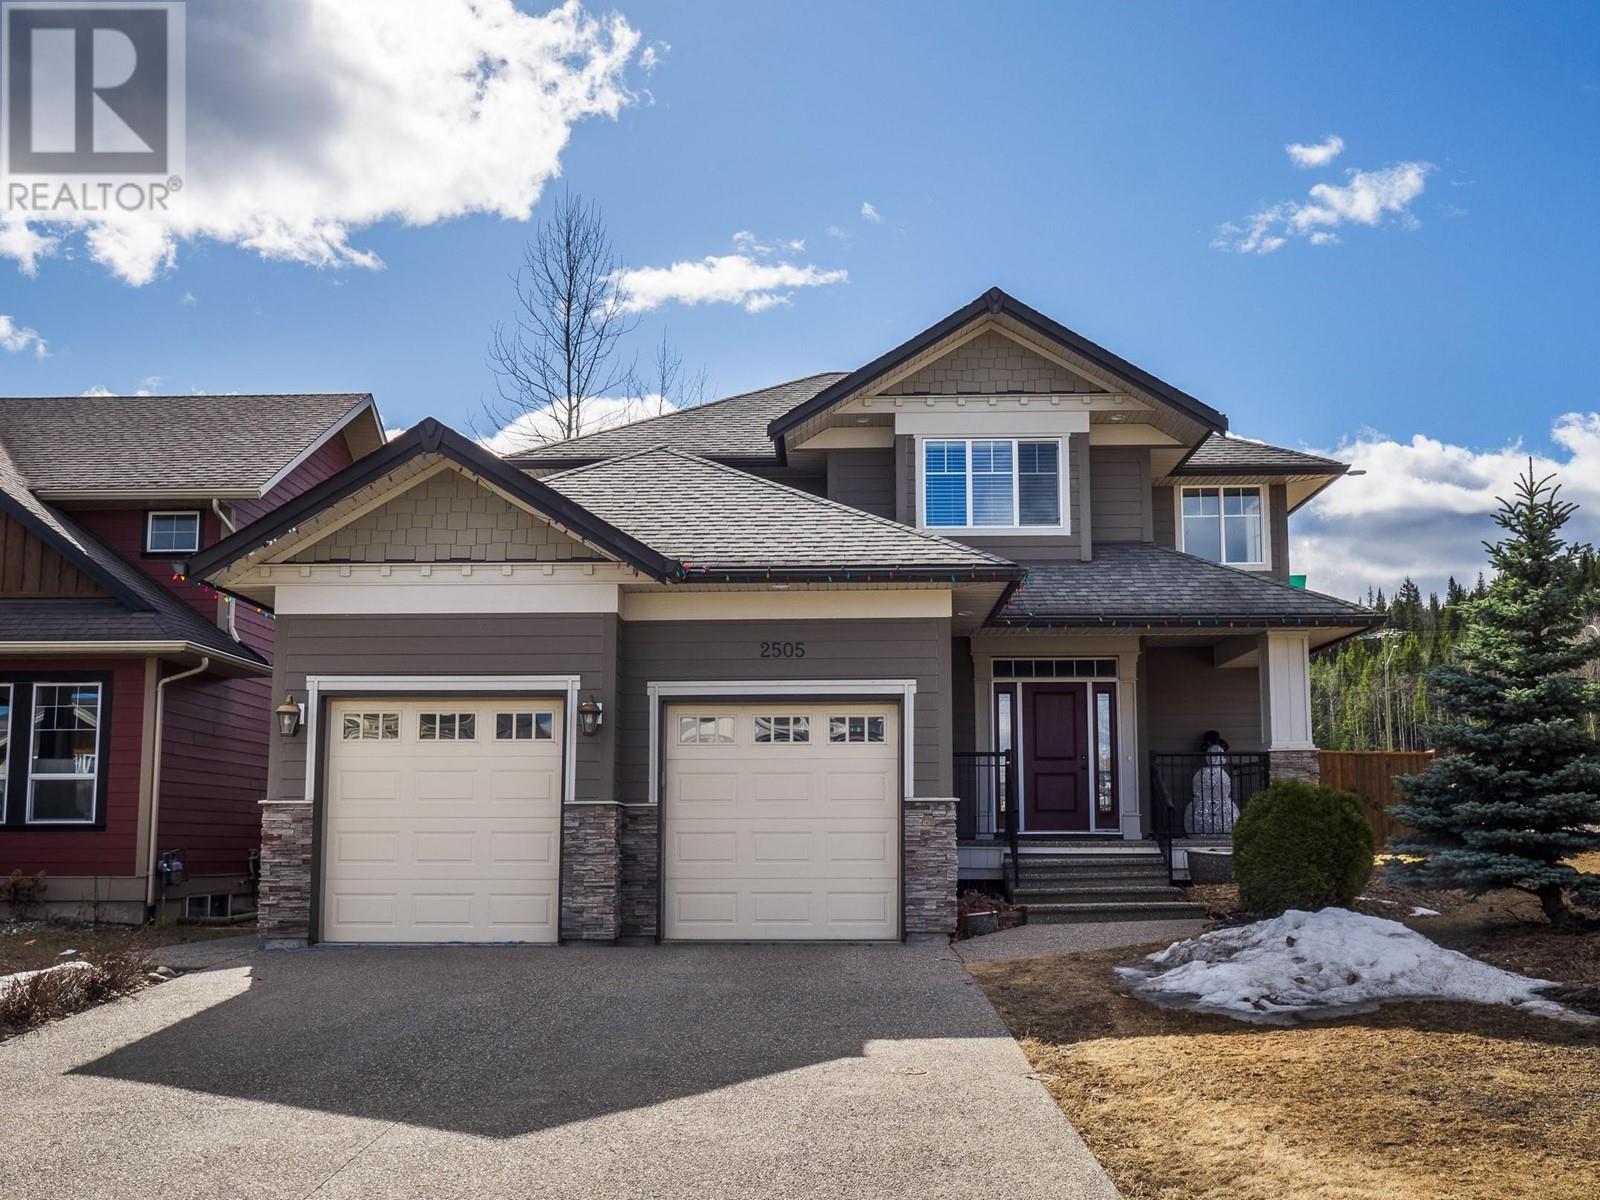 2505 KENNEY COURT located in Prince George, British Columbia